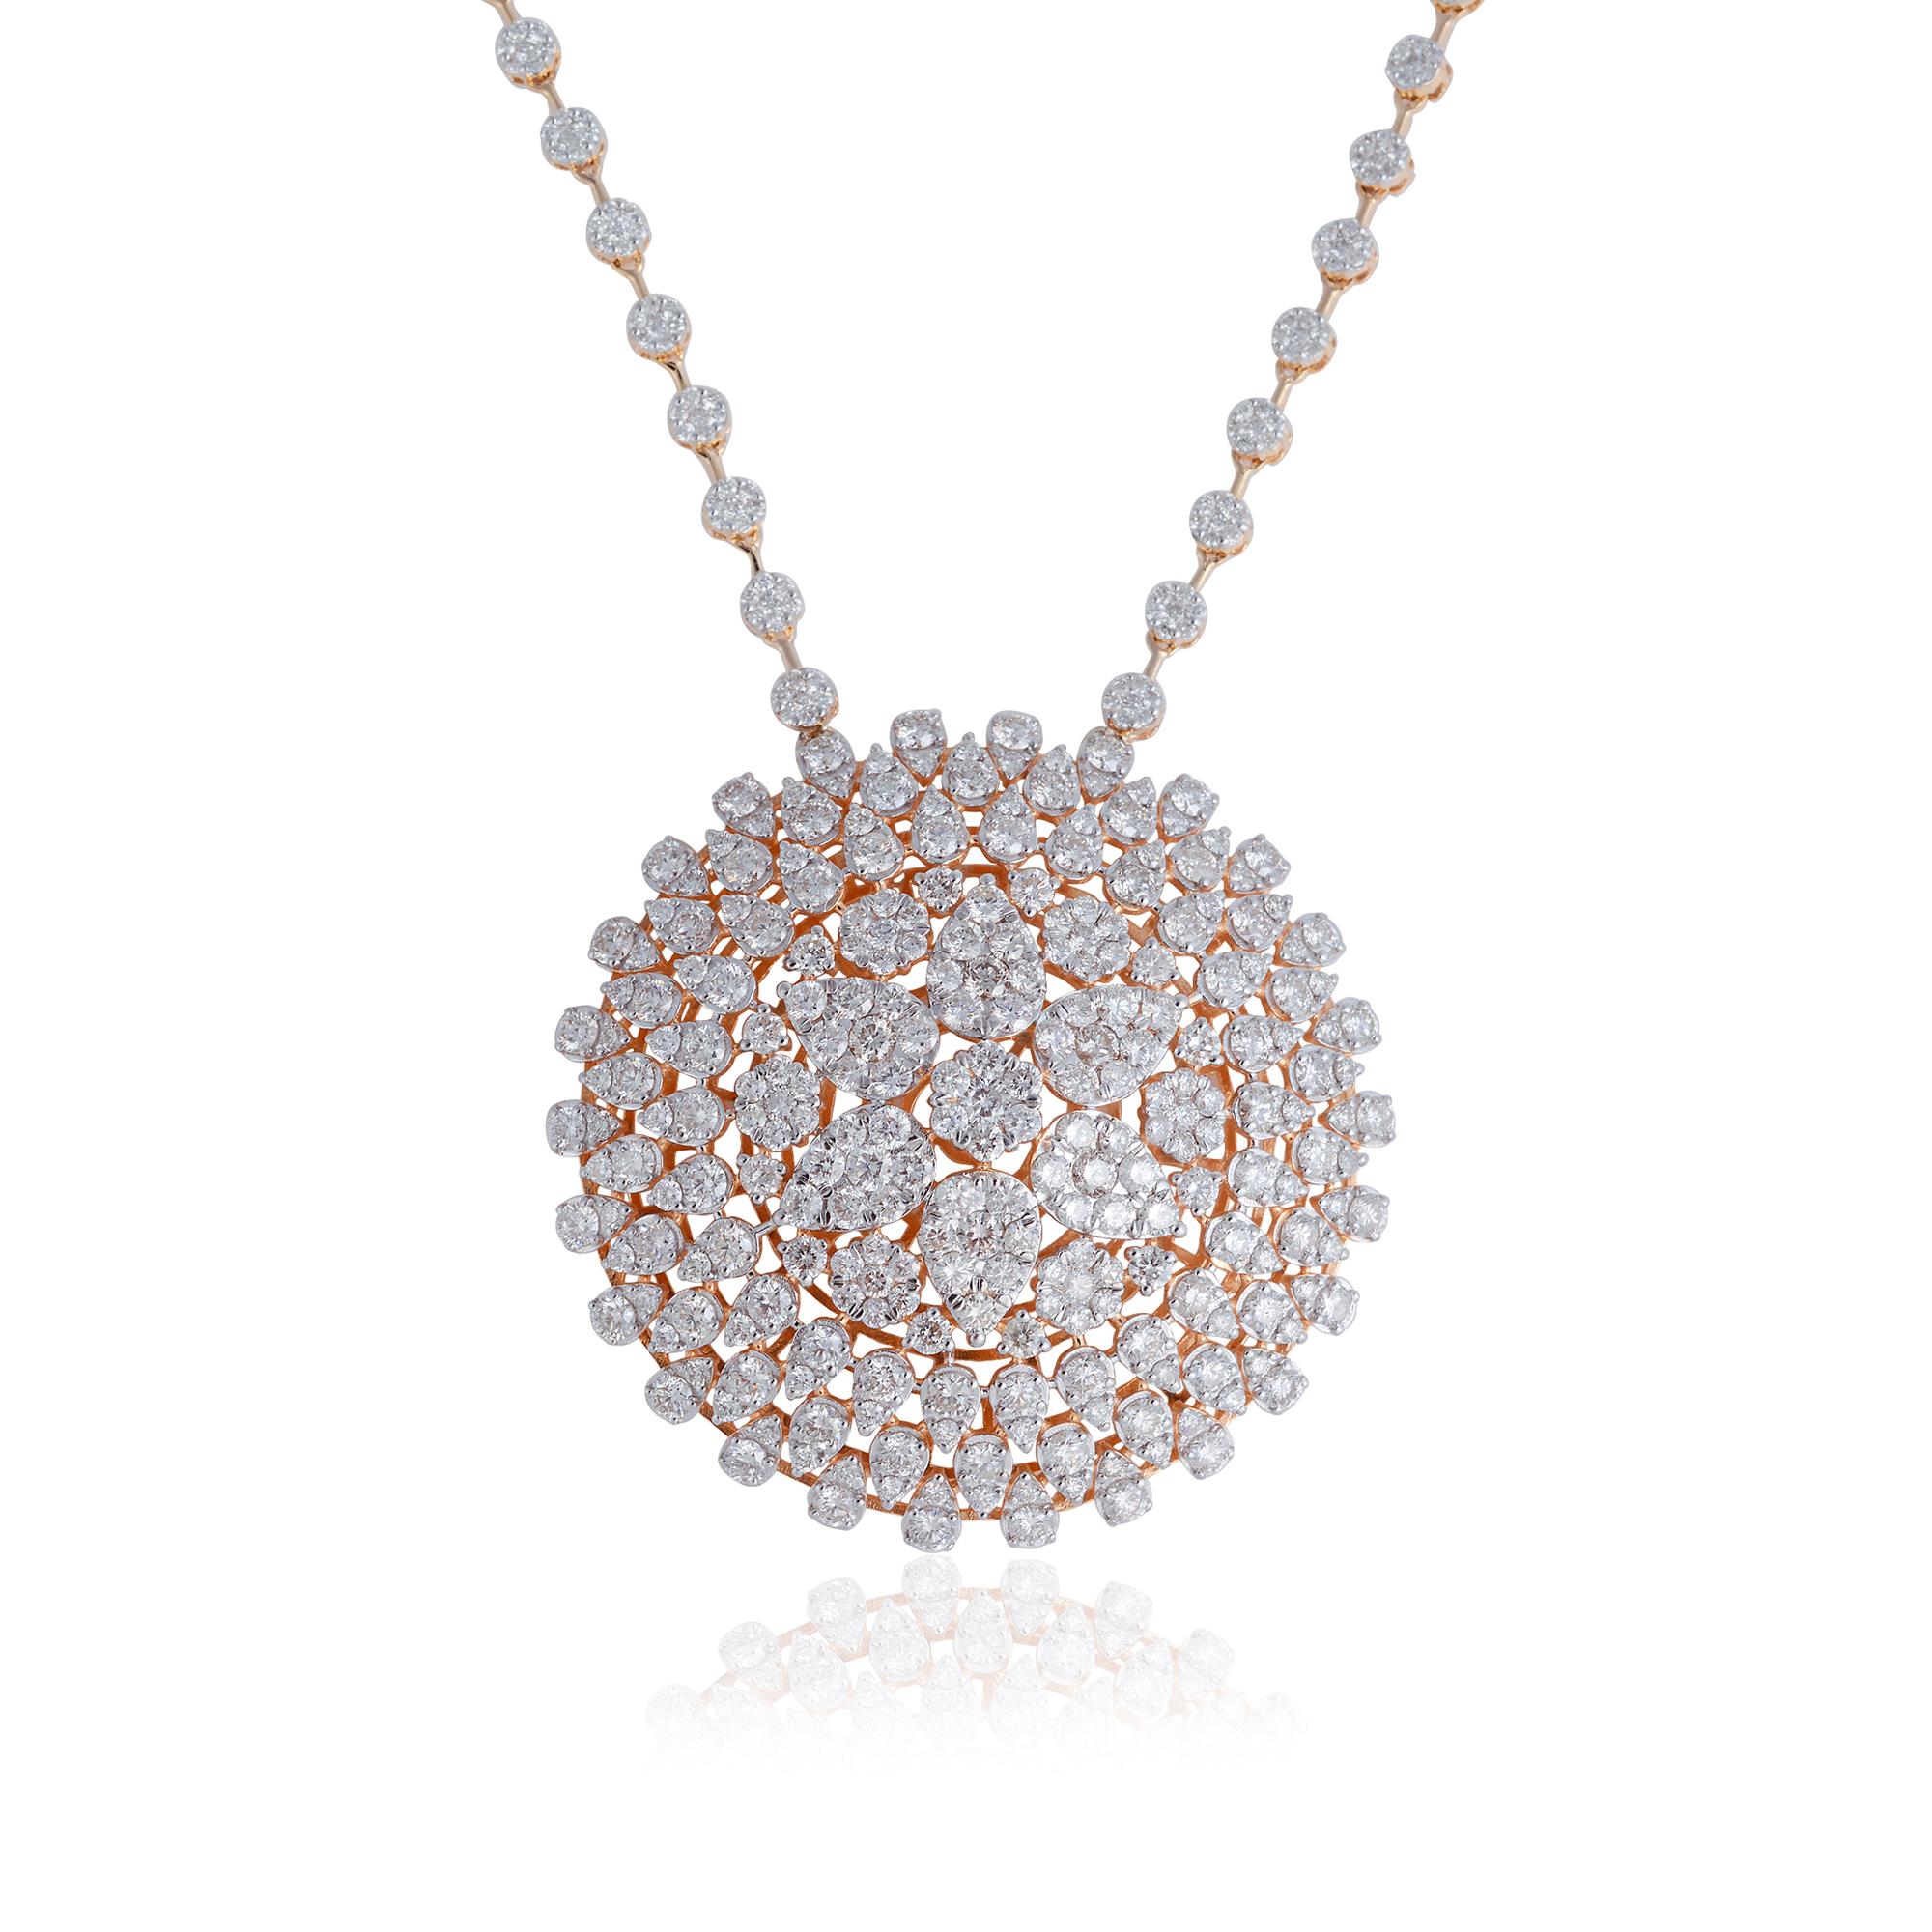 This necklace is designed to make a statement and capture attention with its opulence and timeless beauty. It gracefully hangs from a rose gold chain, accentuating the neckline and adding a touch of sophistication to any ensemble. Whether worn for a